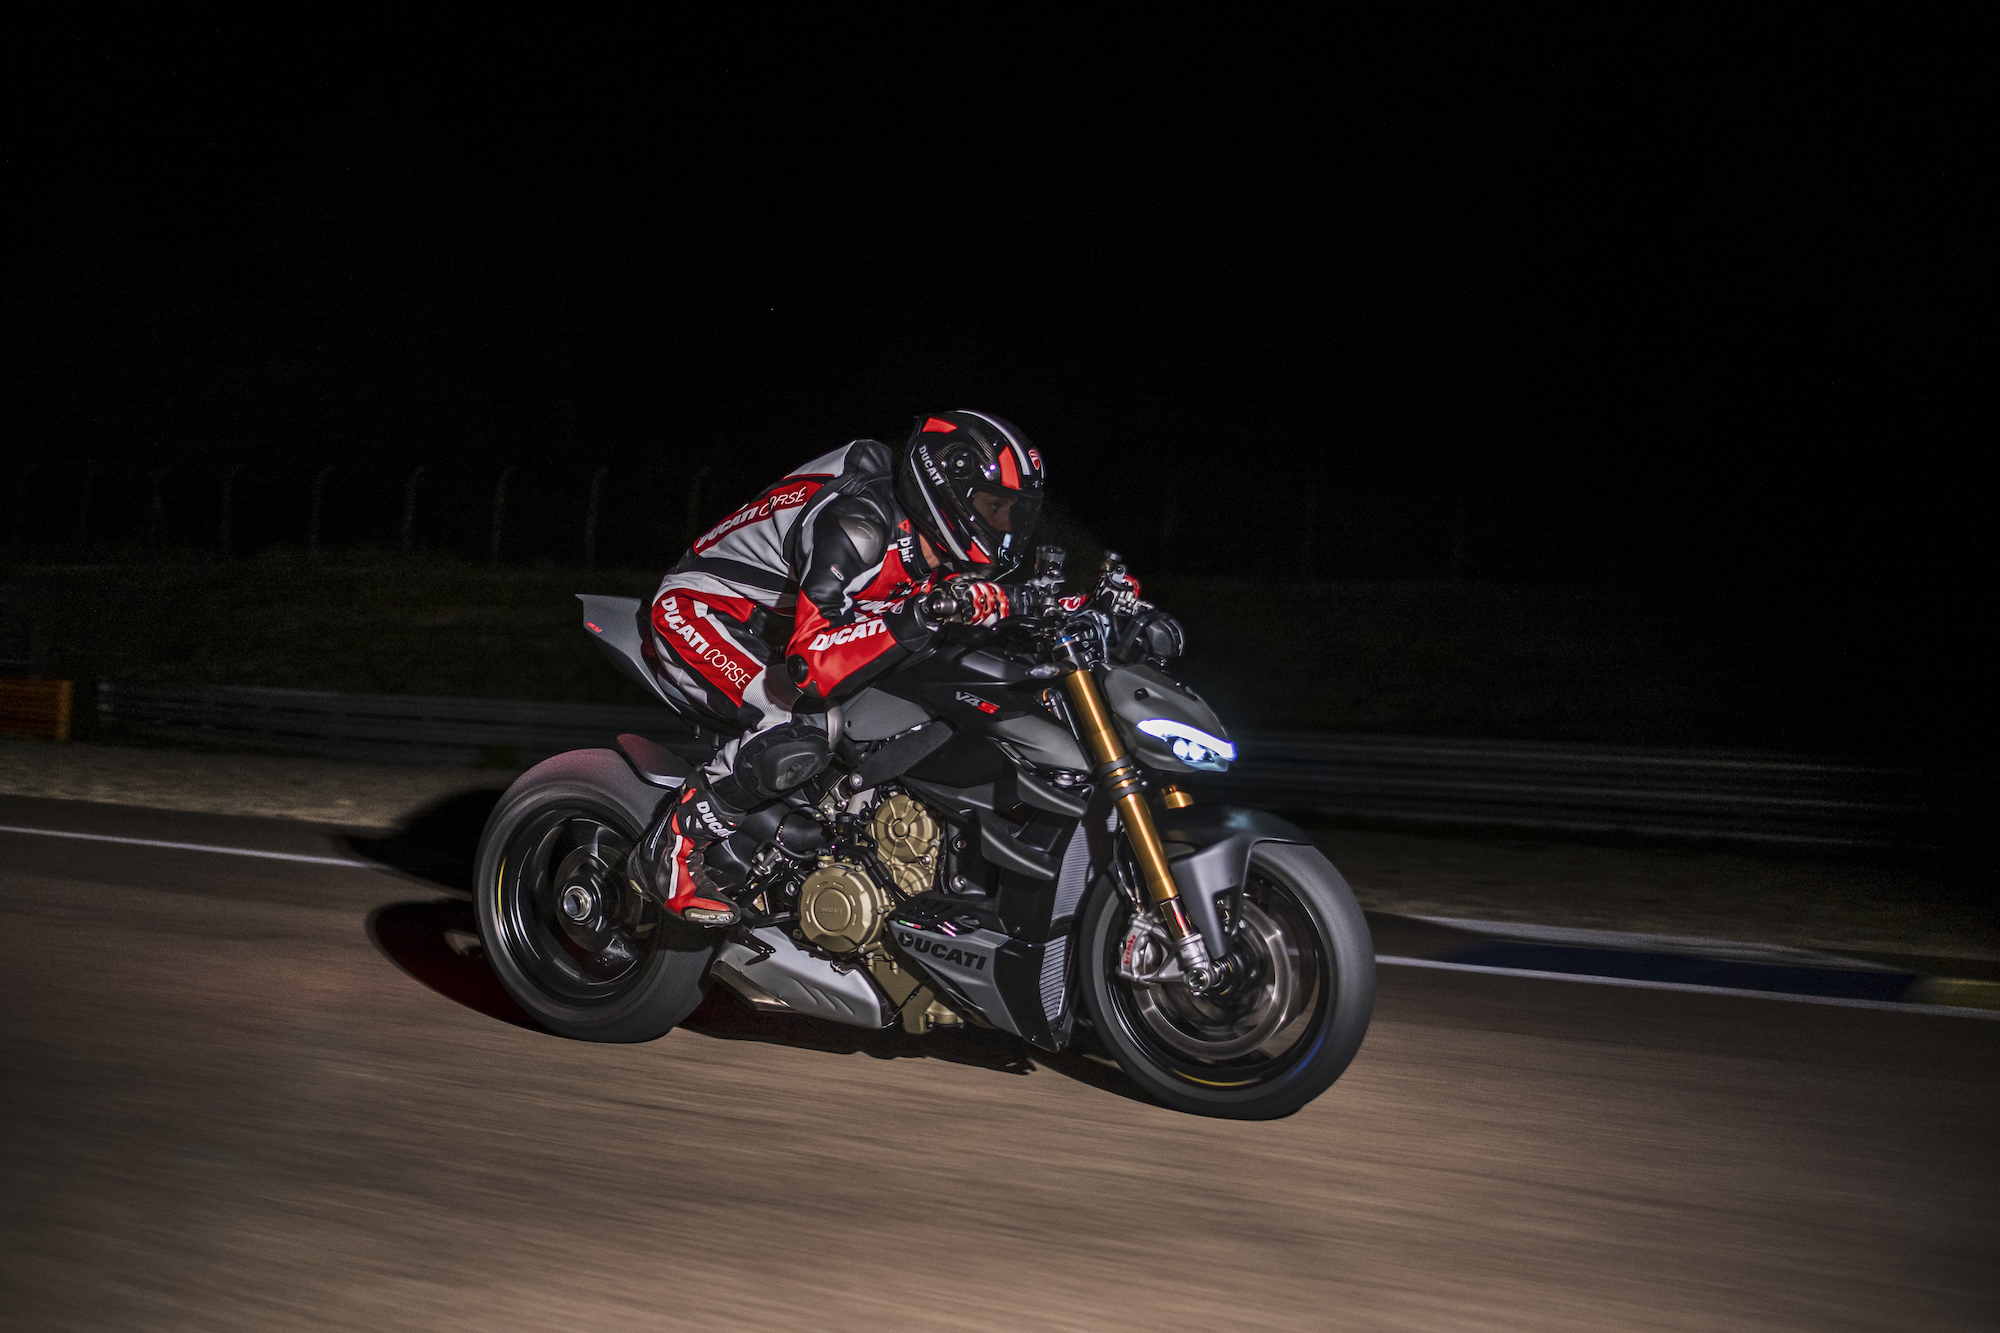 Ducati's new Streetfighter range, showing off the new Streetfighter V4, V4S and V4SP models. Media sourced from Ducati's relevant press release.